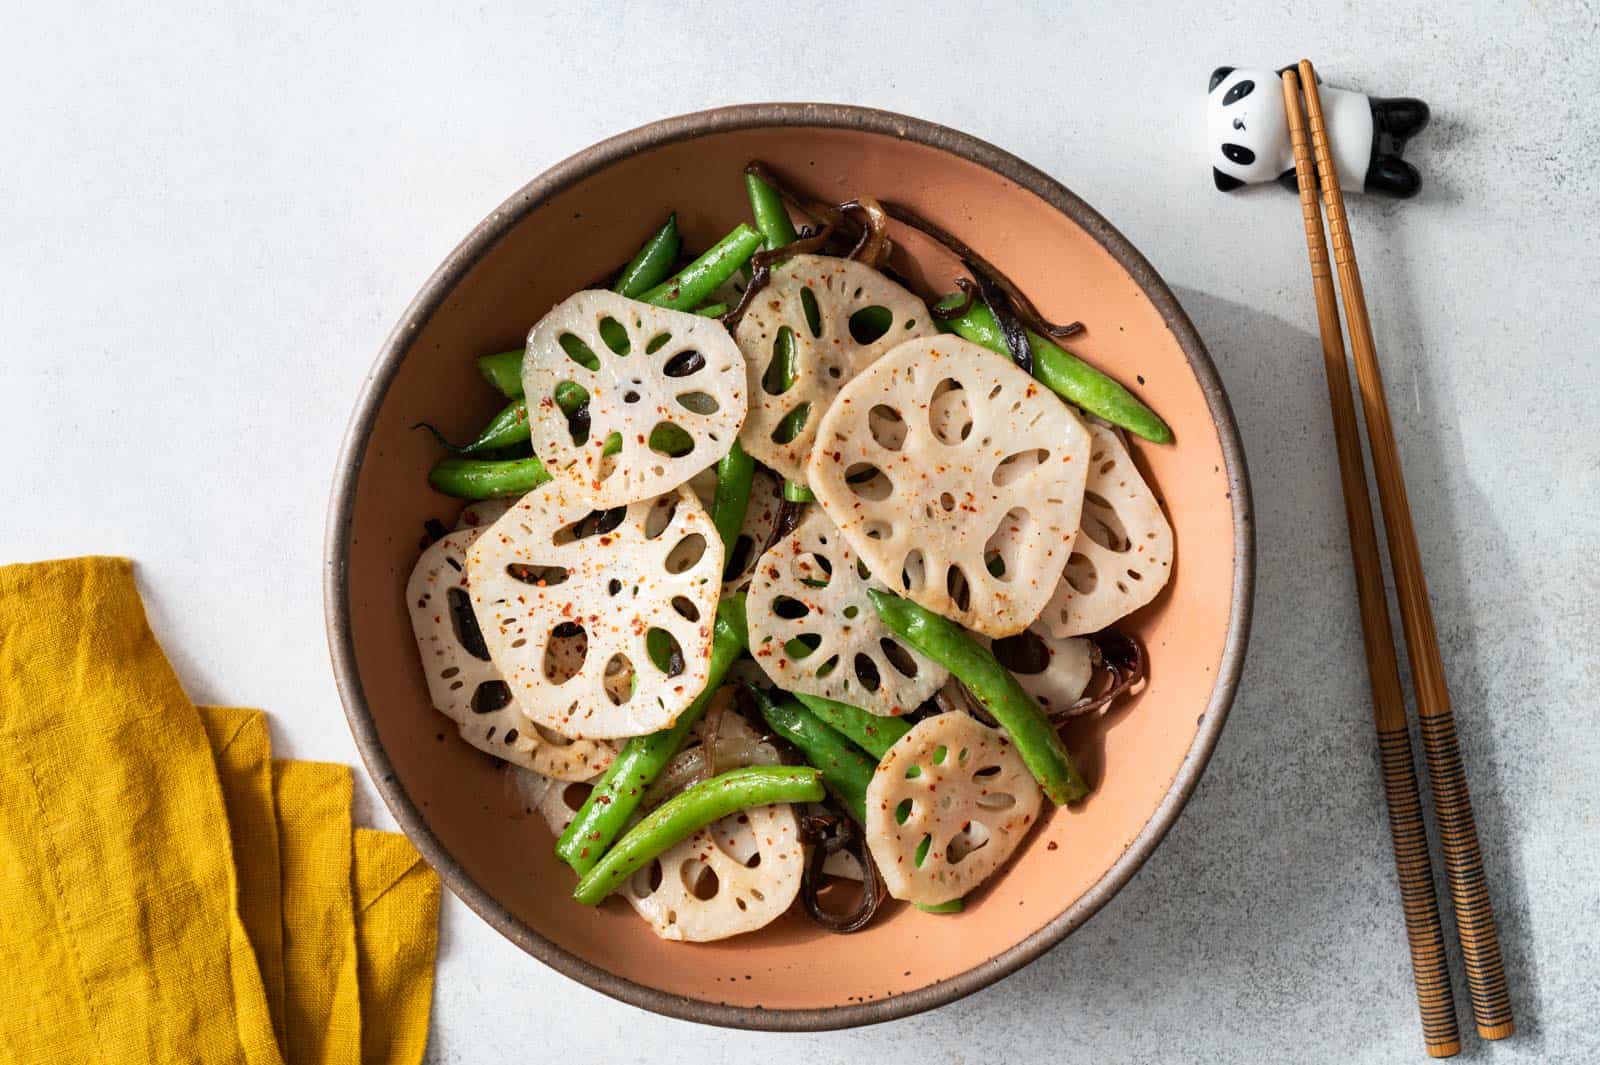 Stir fried lotus root with green beans and wood ear